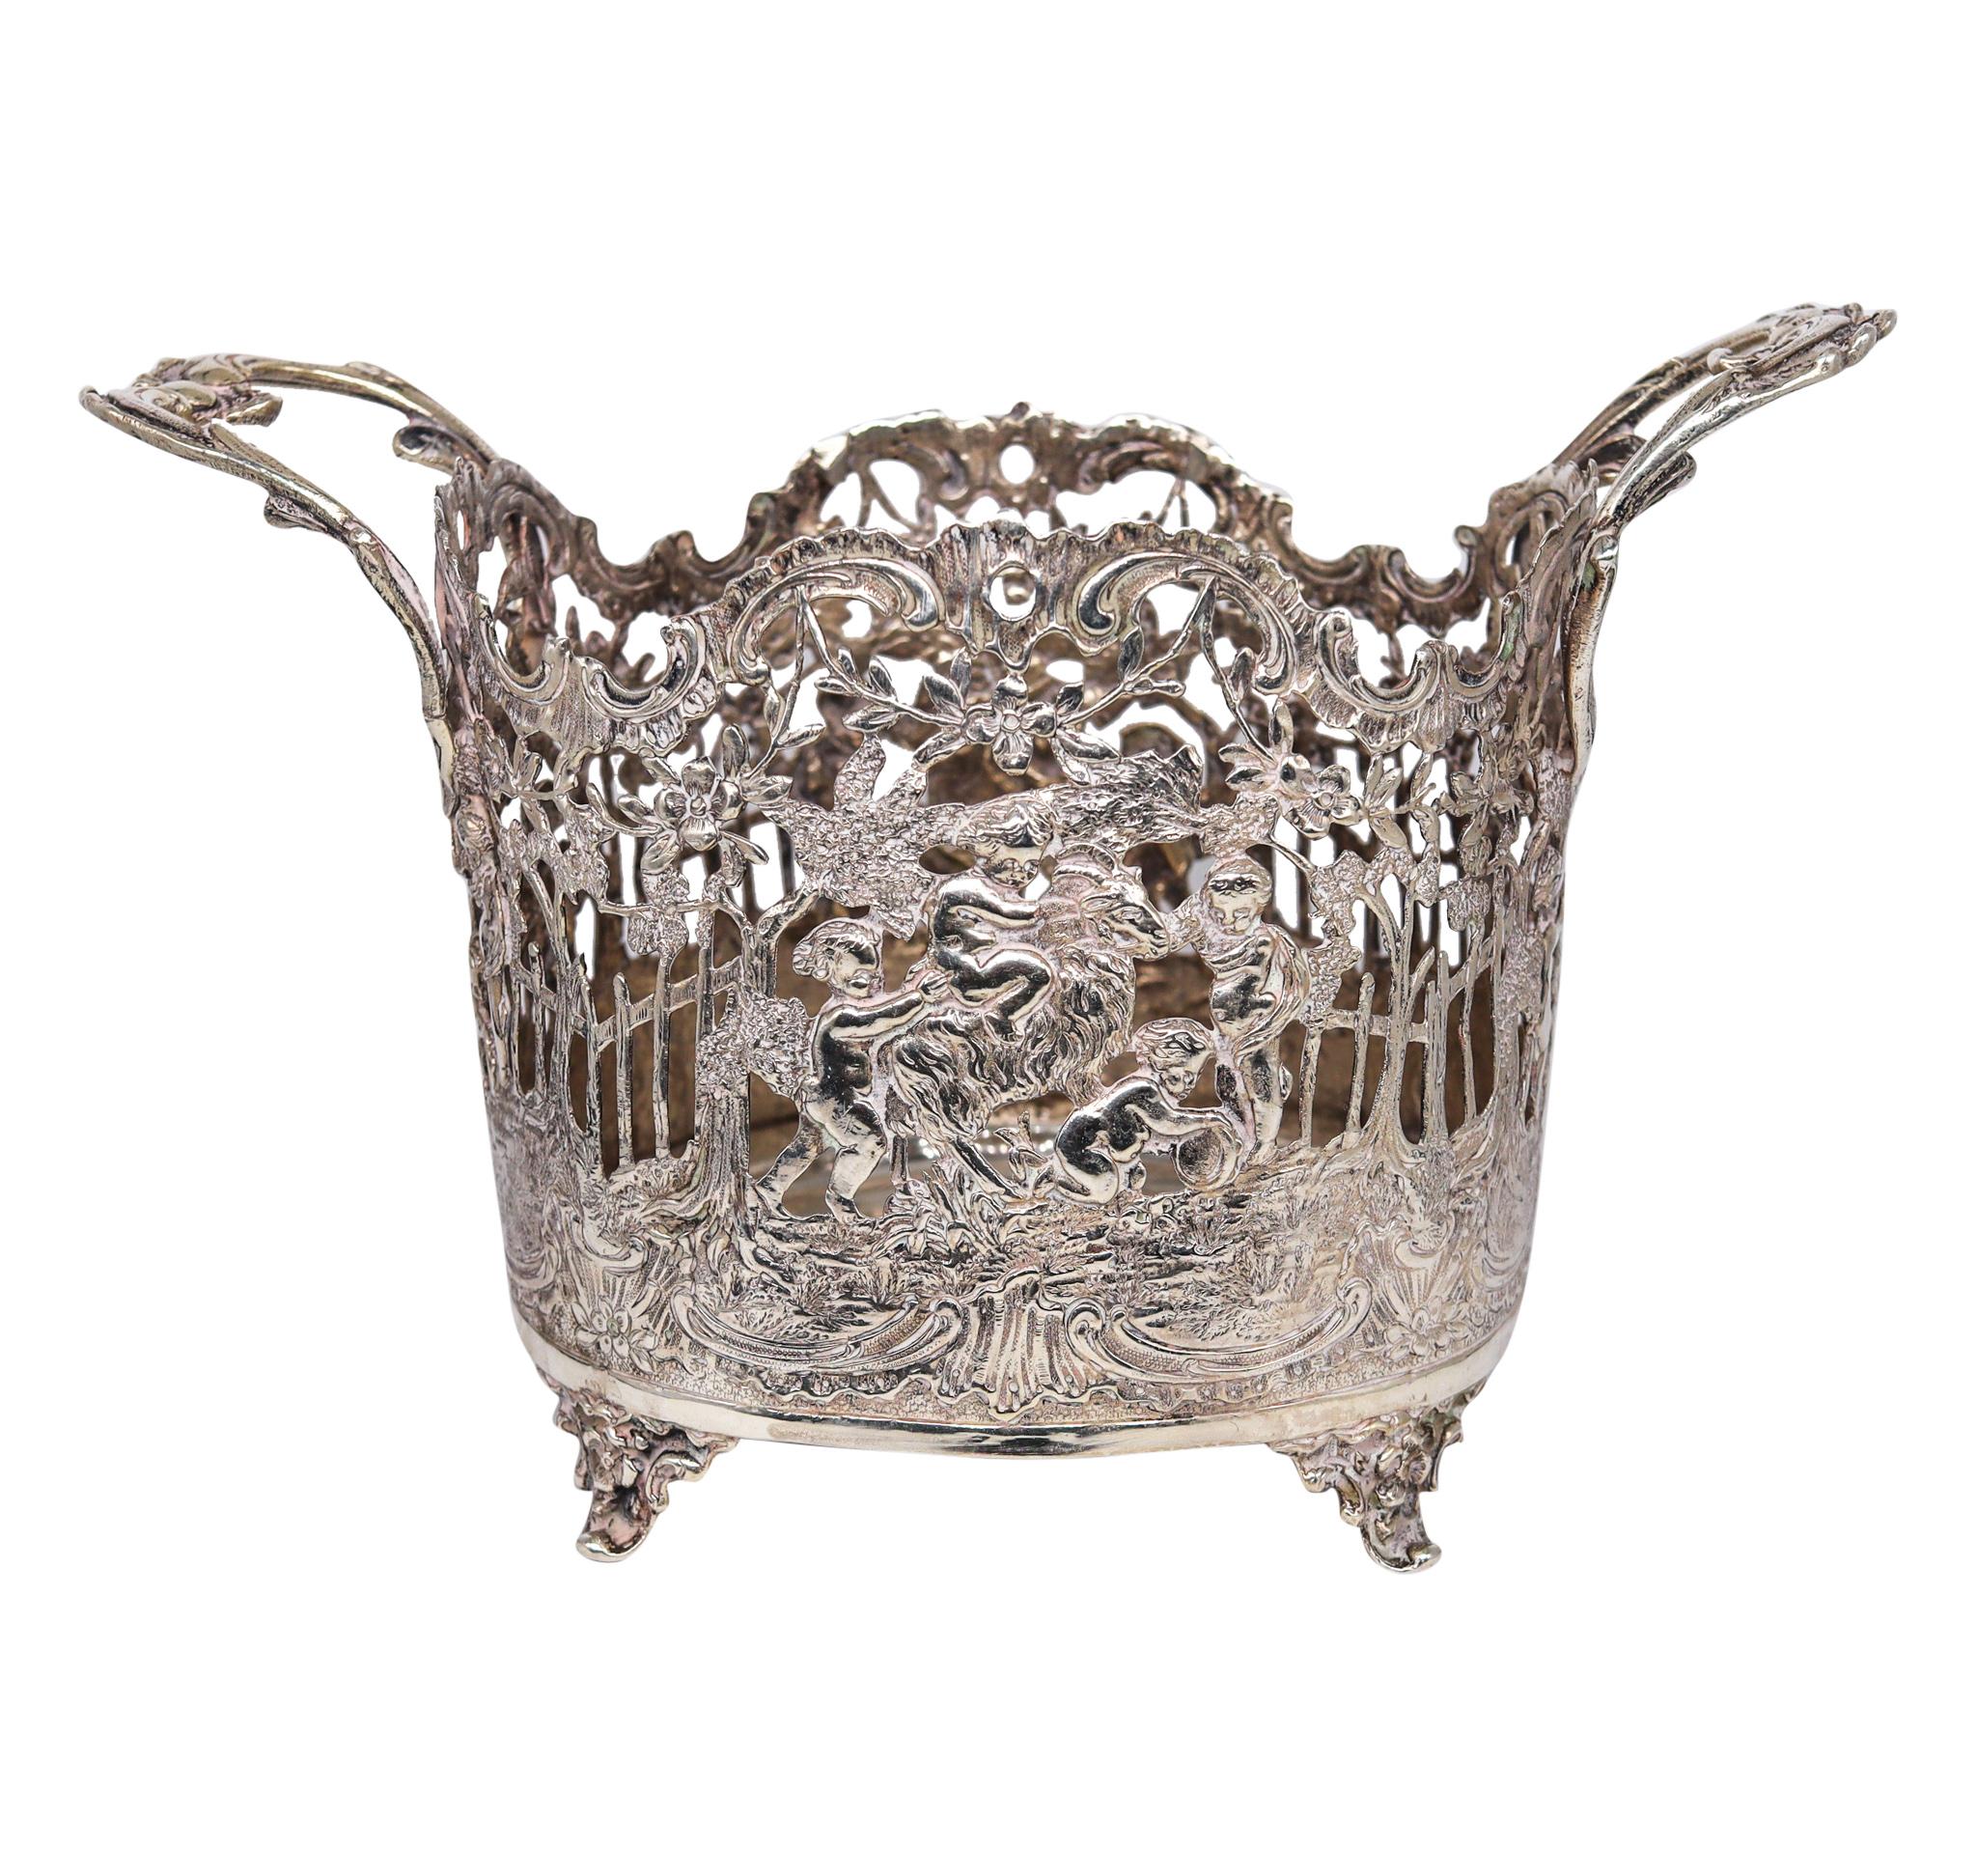 Continental German neoclassic jardinière in silver.

A beautiful highly decorated antique piece, most probably made in Hanau Germany during the Imperial period, circa 1900. This semi oval centerpiece jardiniere was decorated, with Baroque and Art